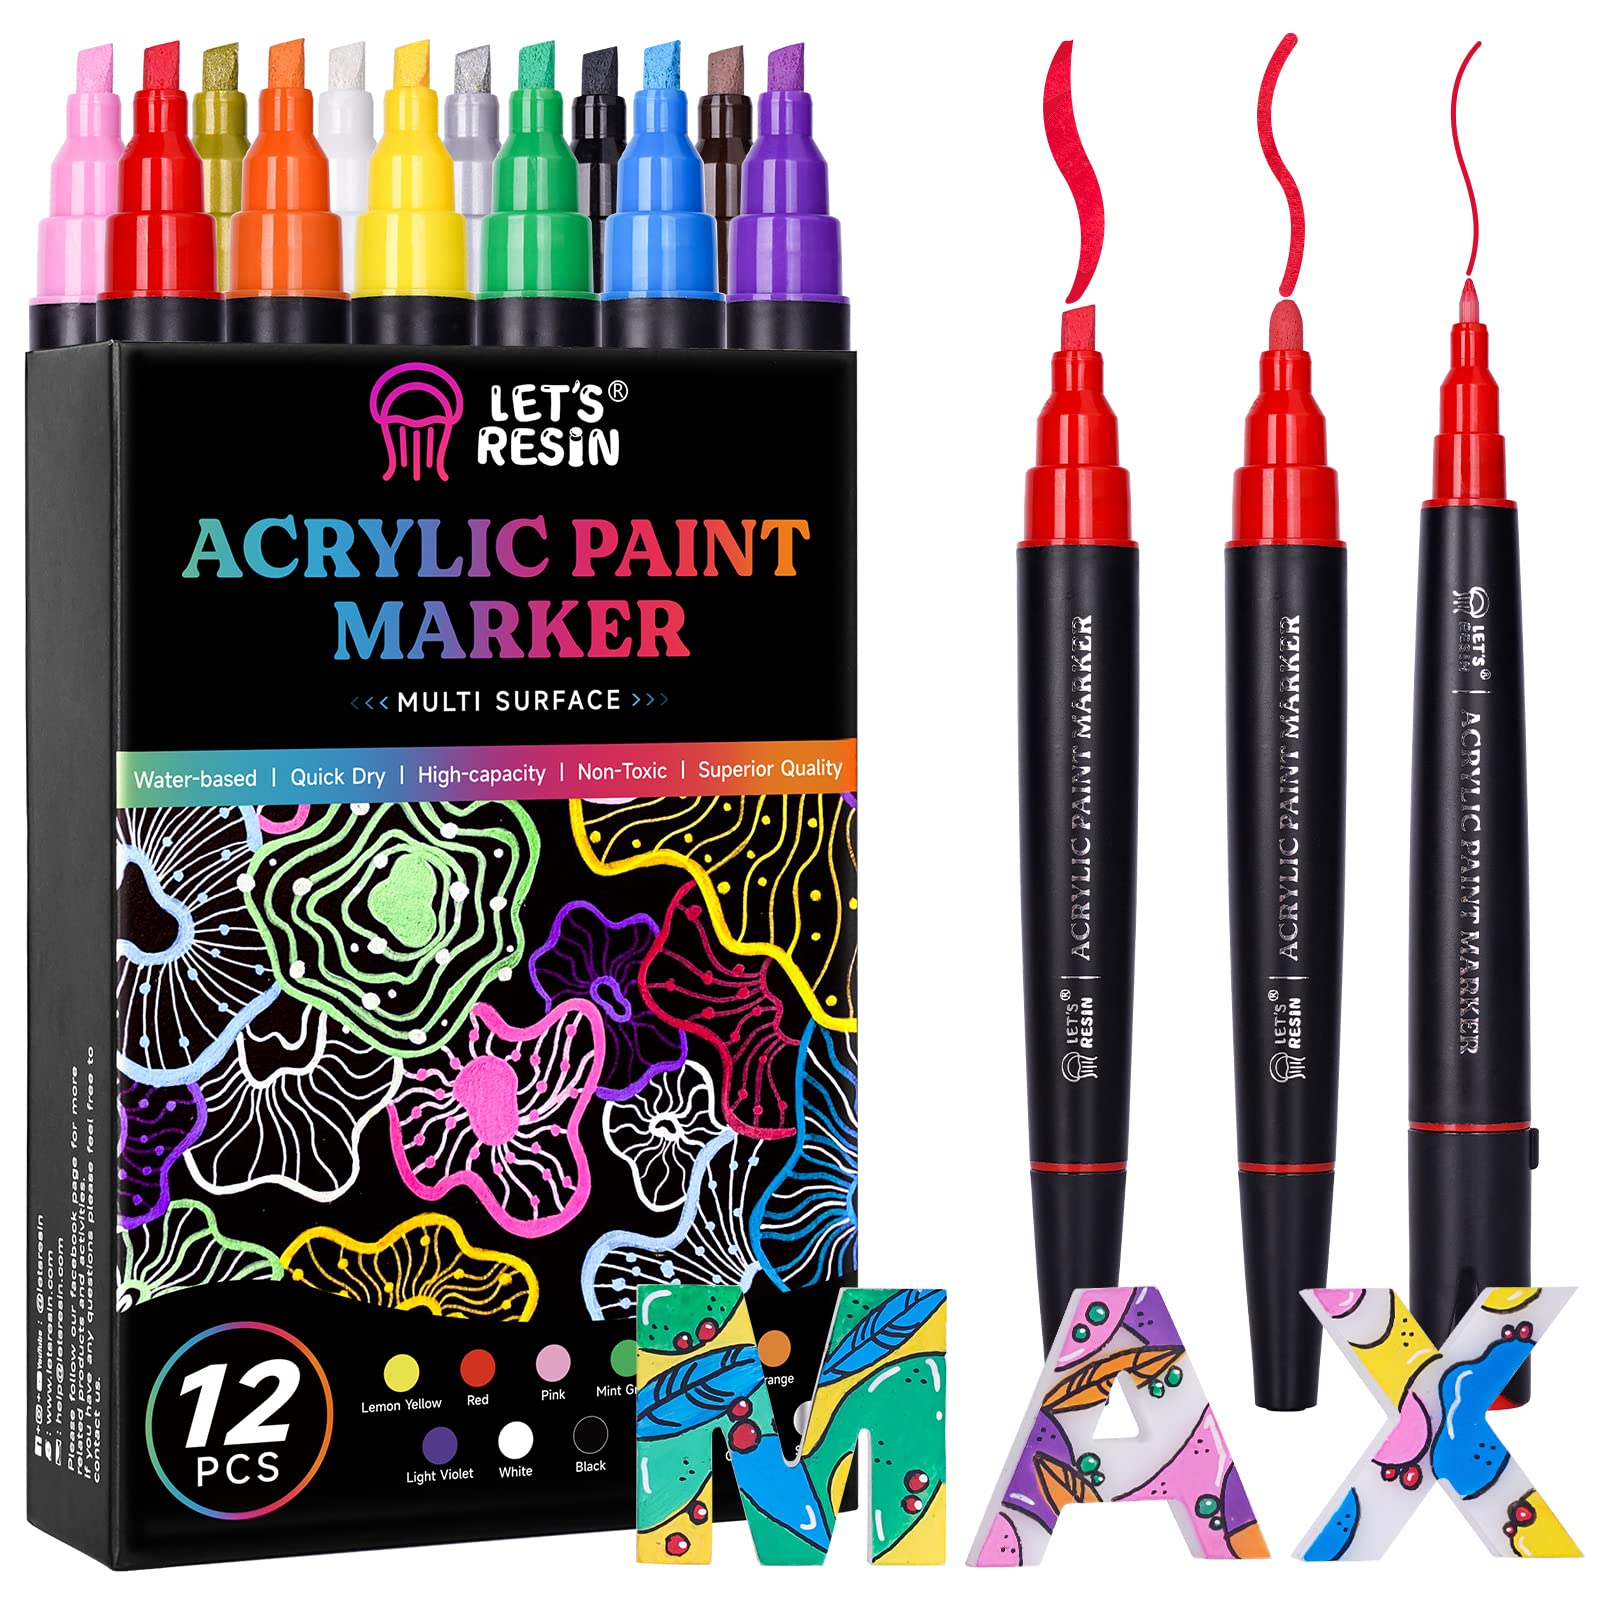 Pintar - A great deal of art is created only with great acrylic